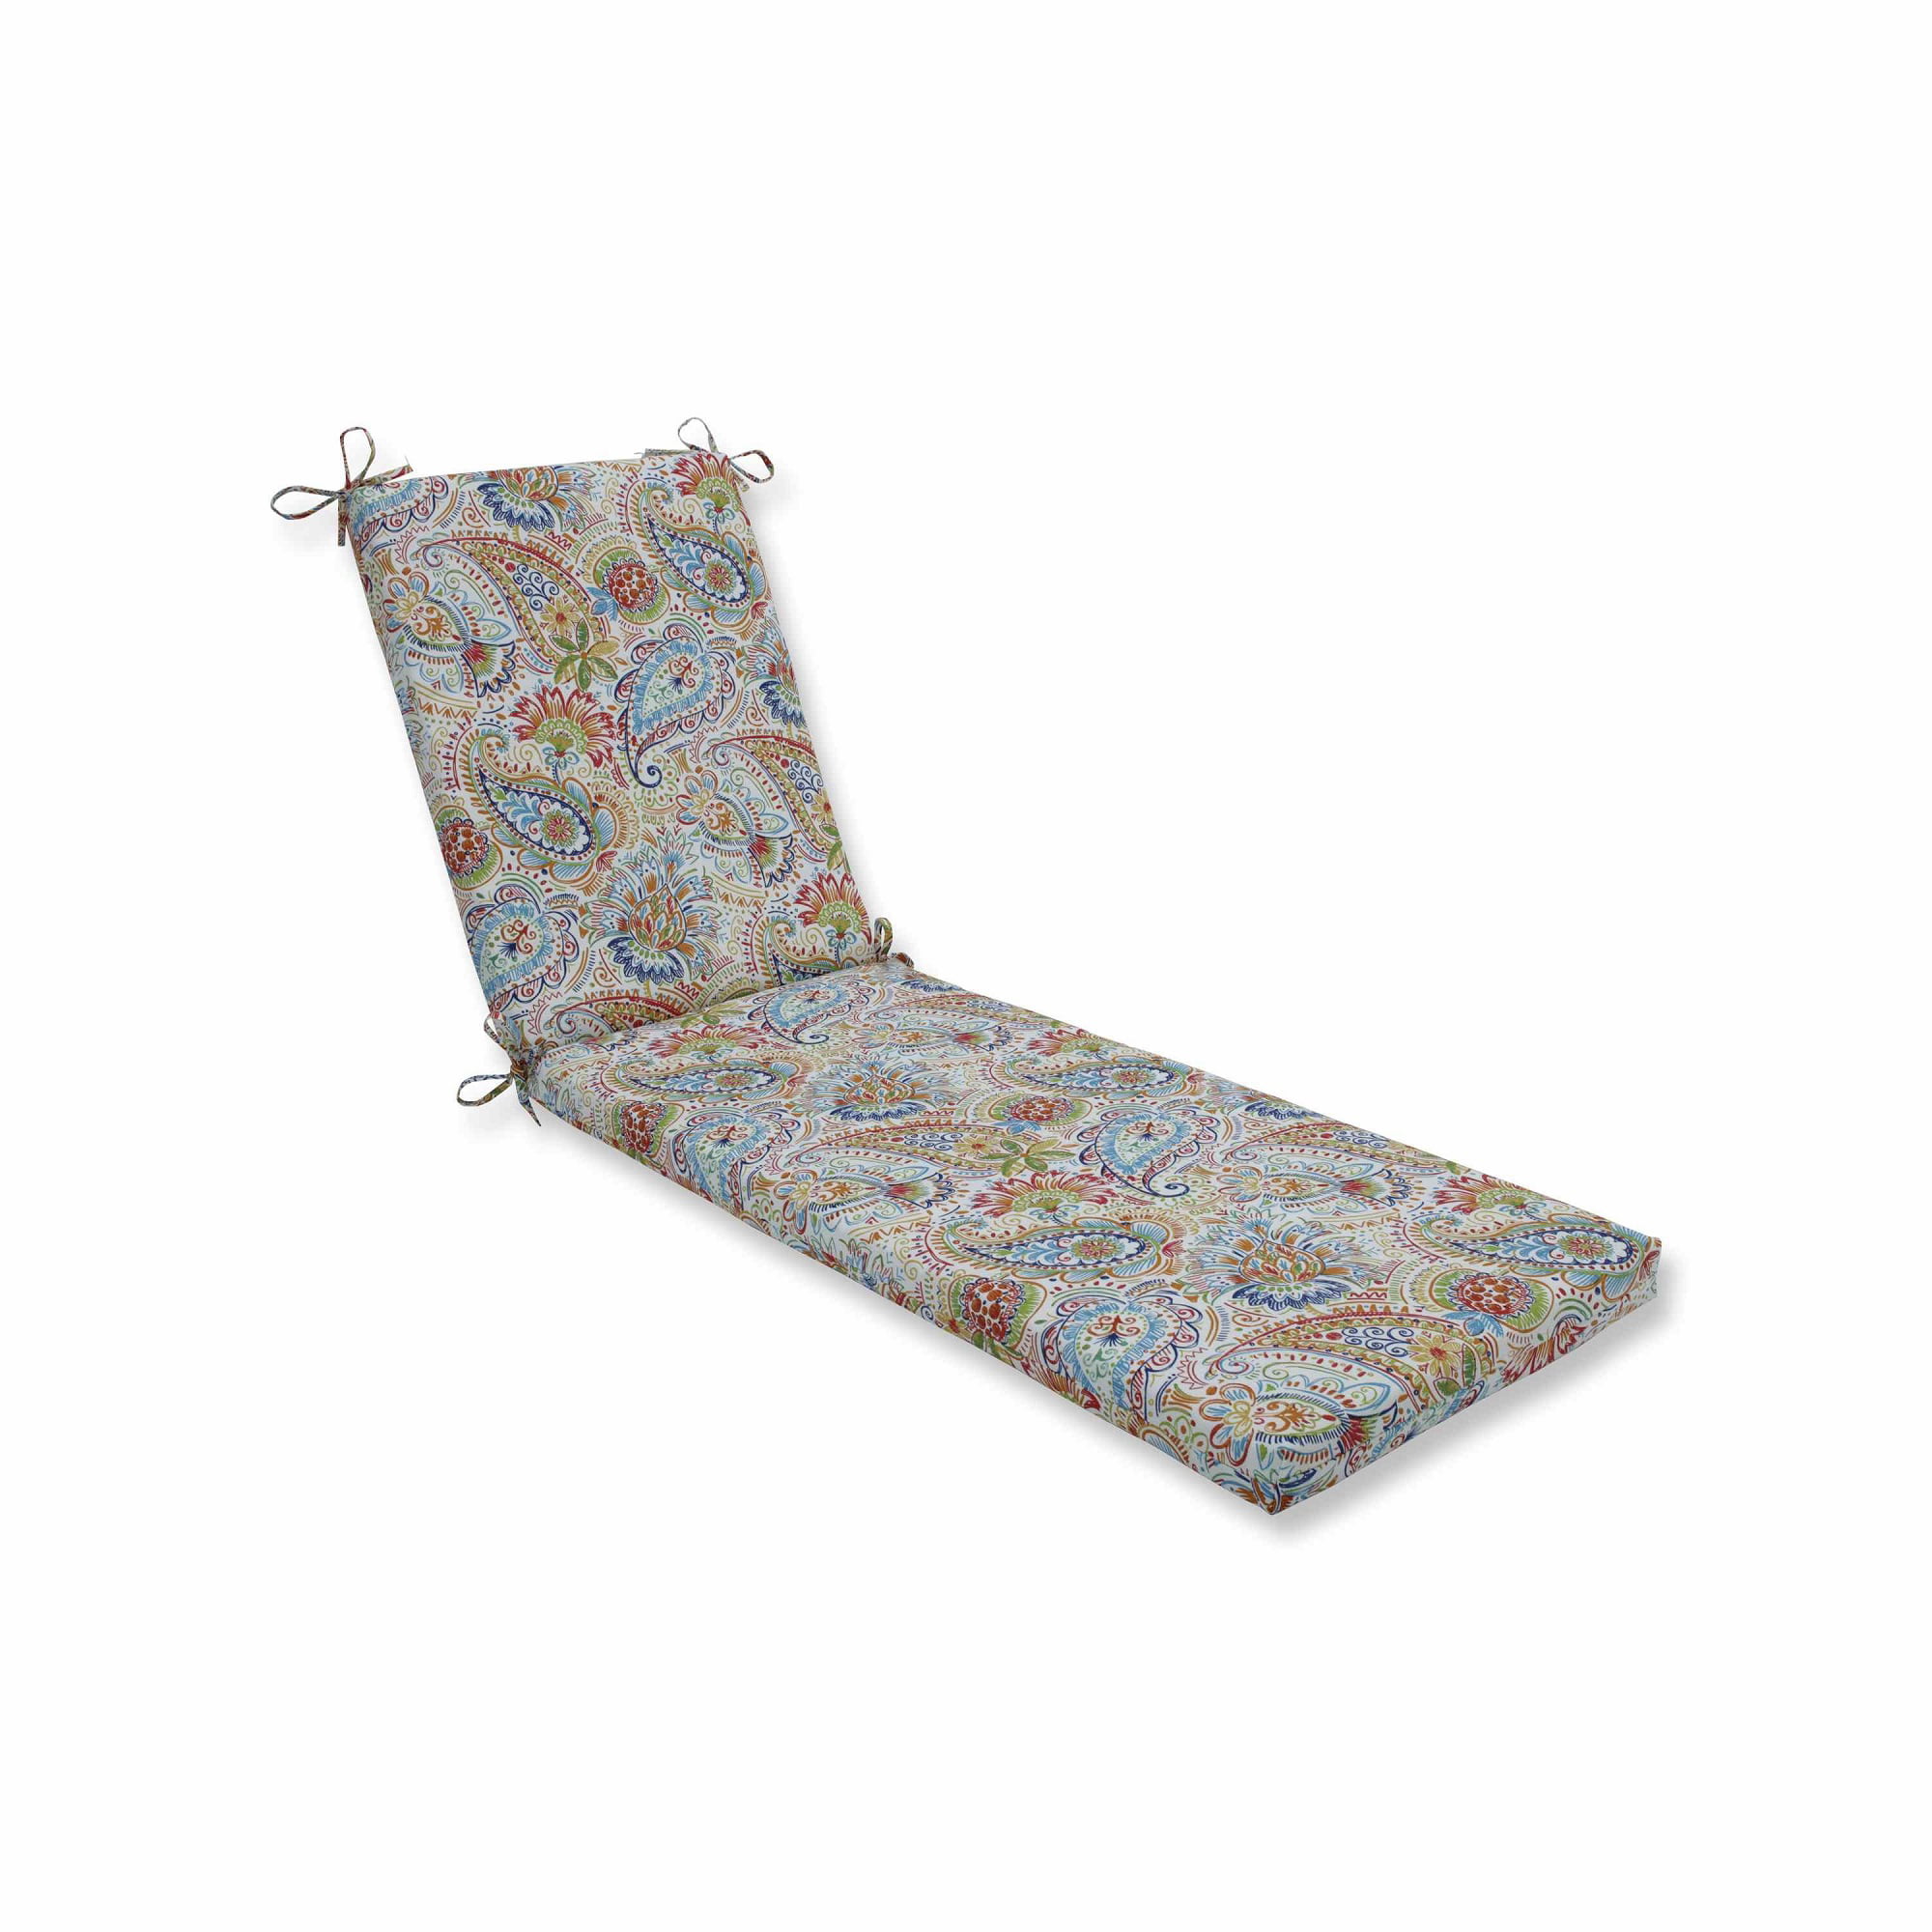 CC Home Furnishings 80 Vibrantly Colored Paisley Pattern Outdoor Patio Chaise Lounge Cushion 